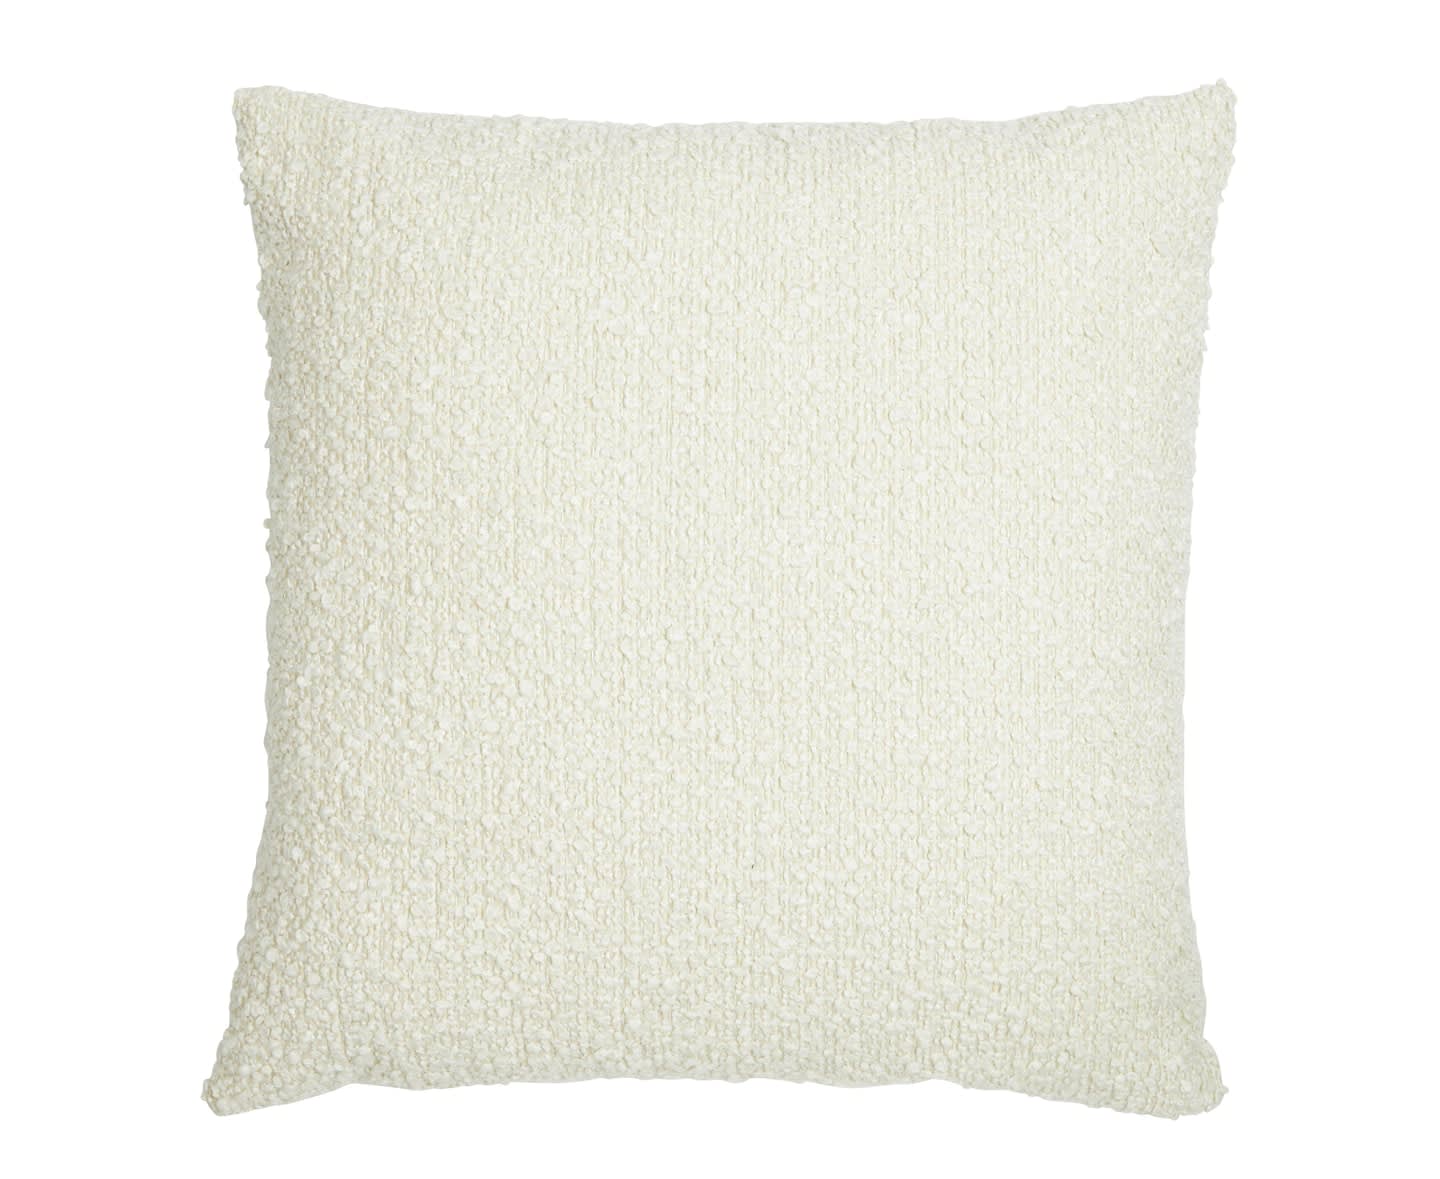 Jakobsdals Moment Boucle Kuddfodral Off-White 60x60